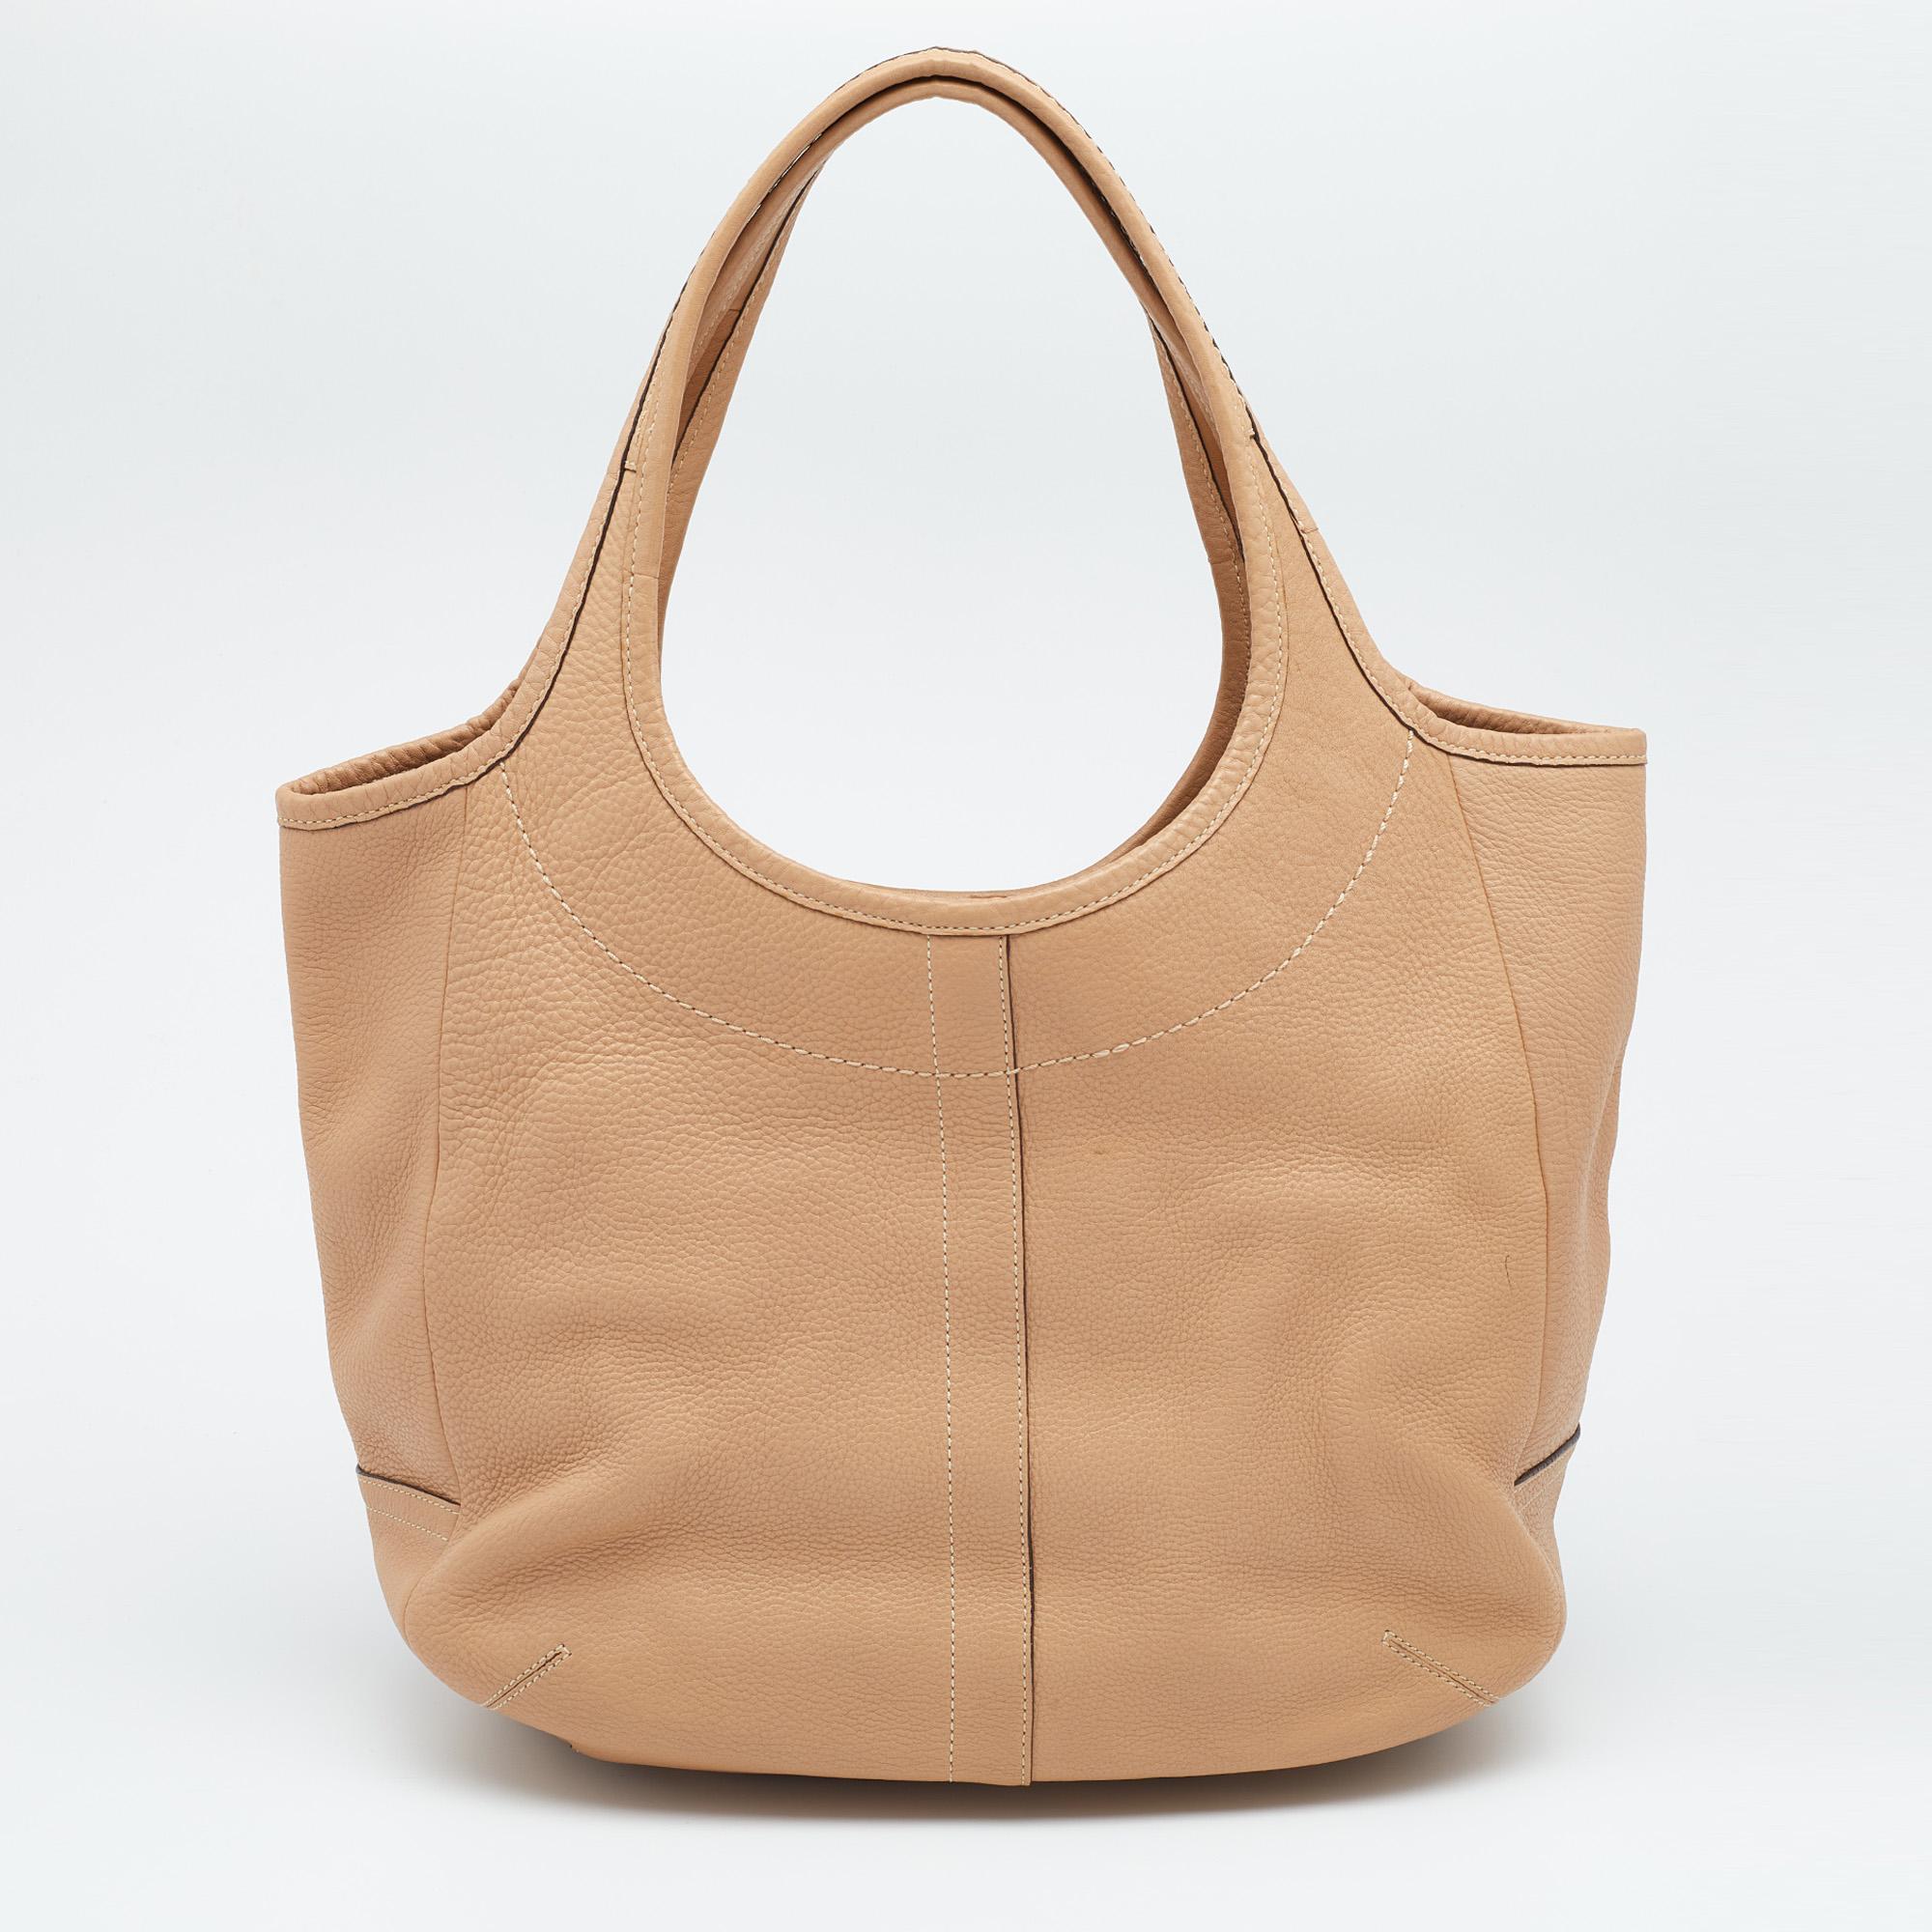 Flaunt your unique aesthetics in fashion with this fabulous XL Ergo Legacy tote from Coach. It is made from tan pebbled leather on the exterior. It features gold-toned hardware and a satin-lined interior. The structured silhouette of this tote is